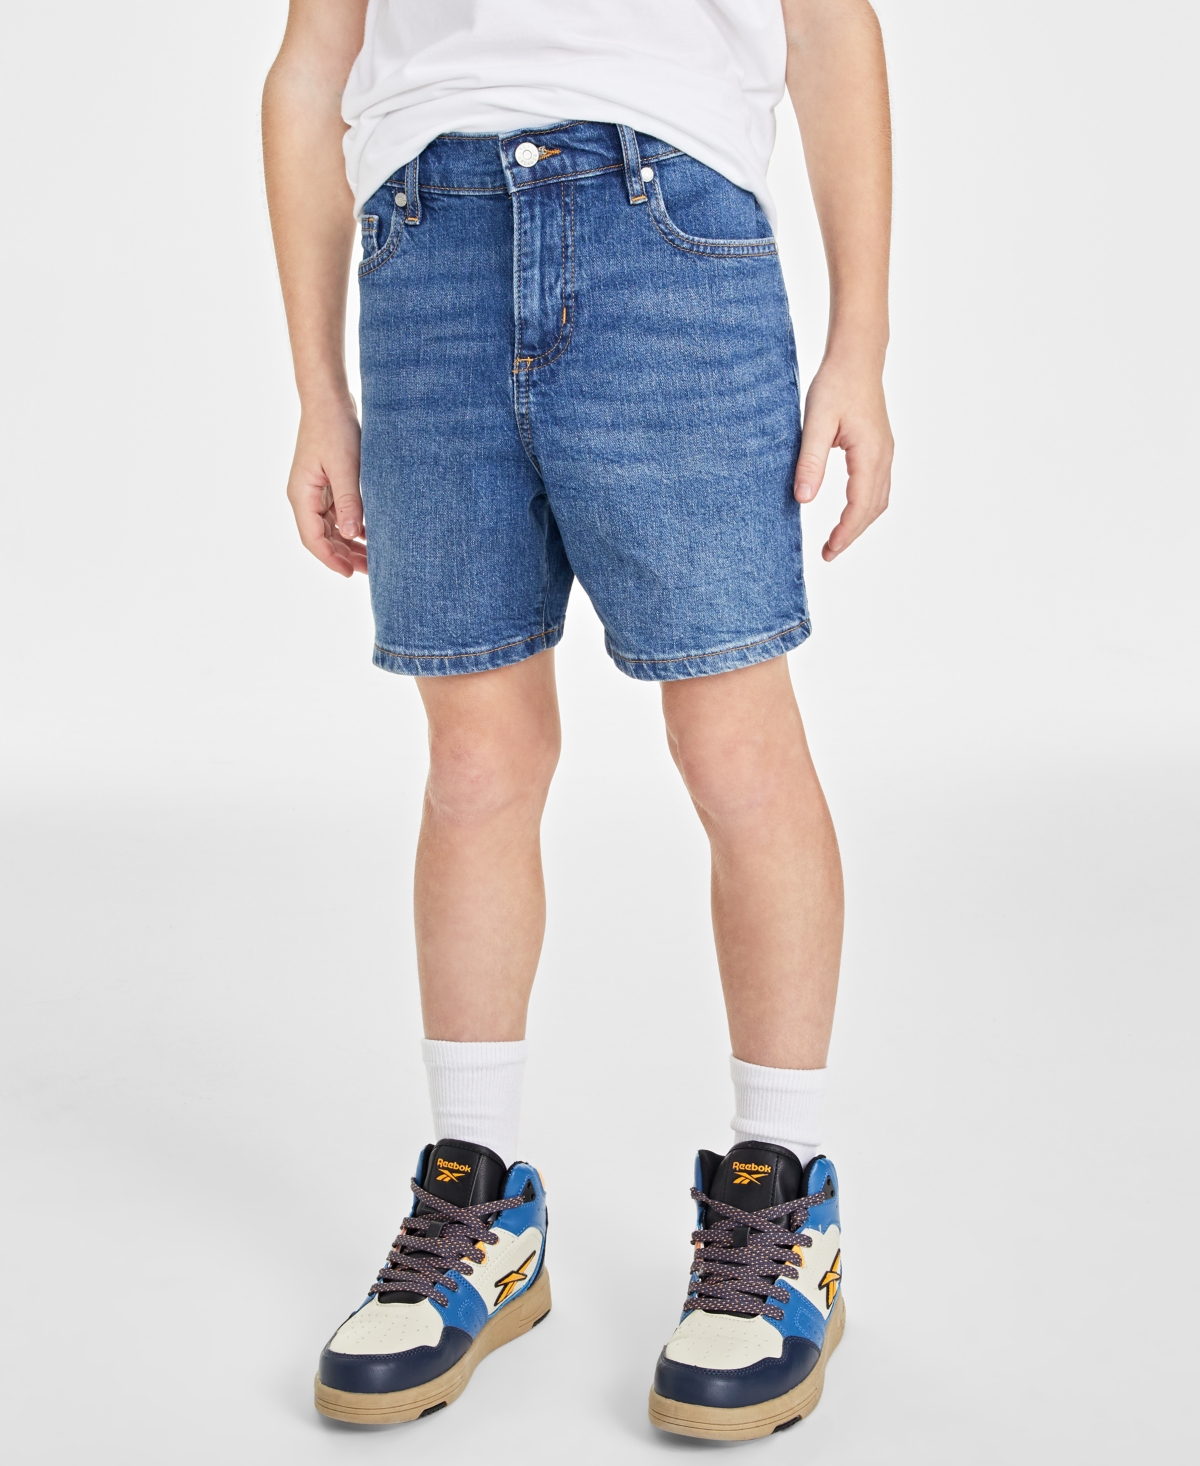 Epic Threads Big Boys 5-pocket Denim Shorts, Created For Macy's In Larch